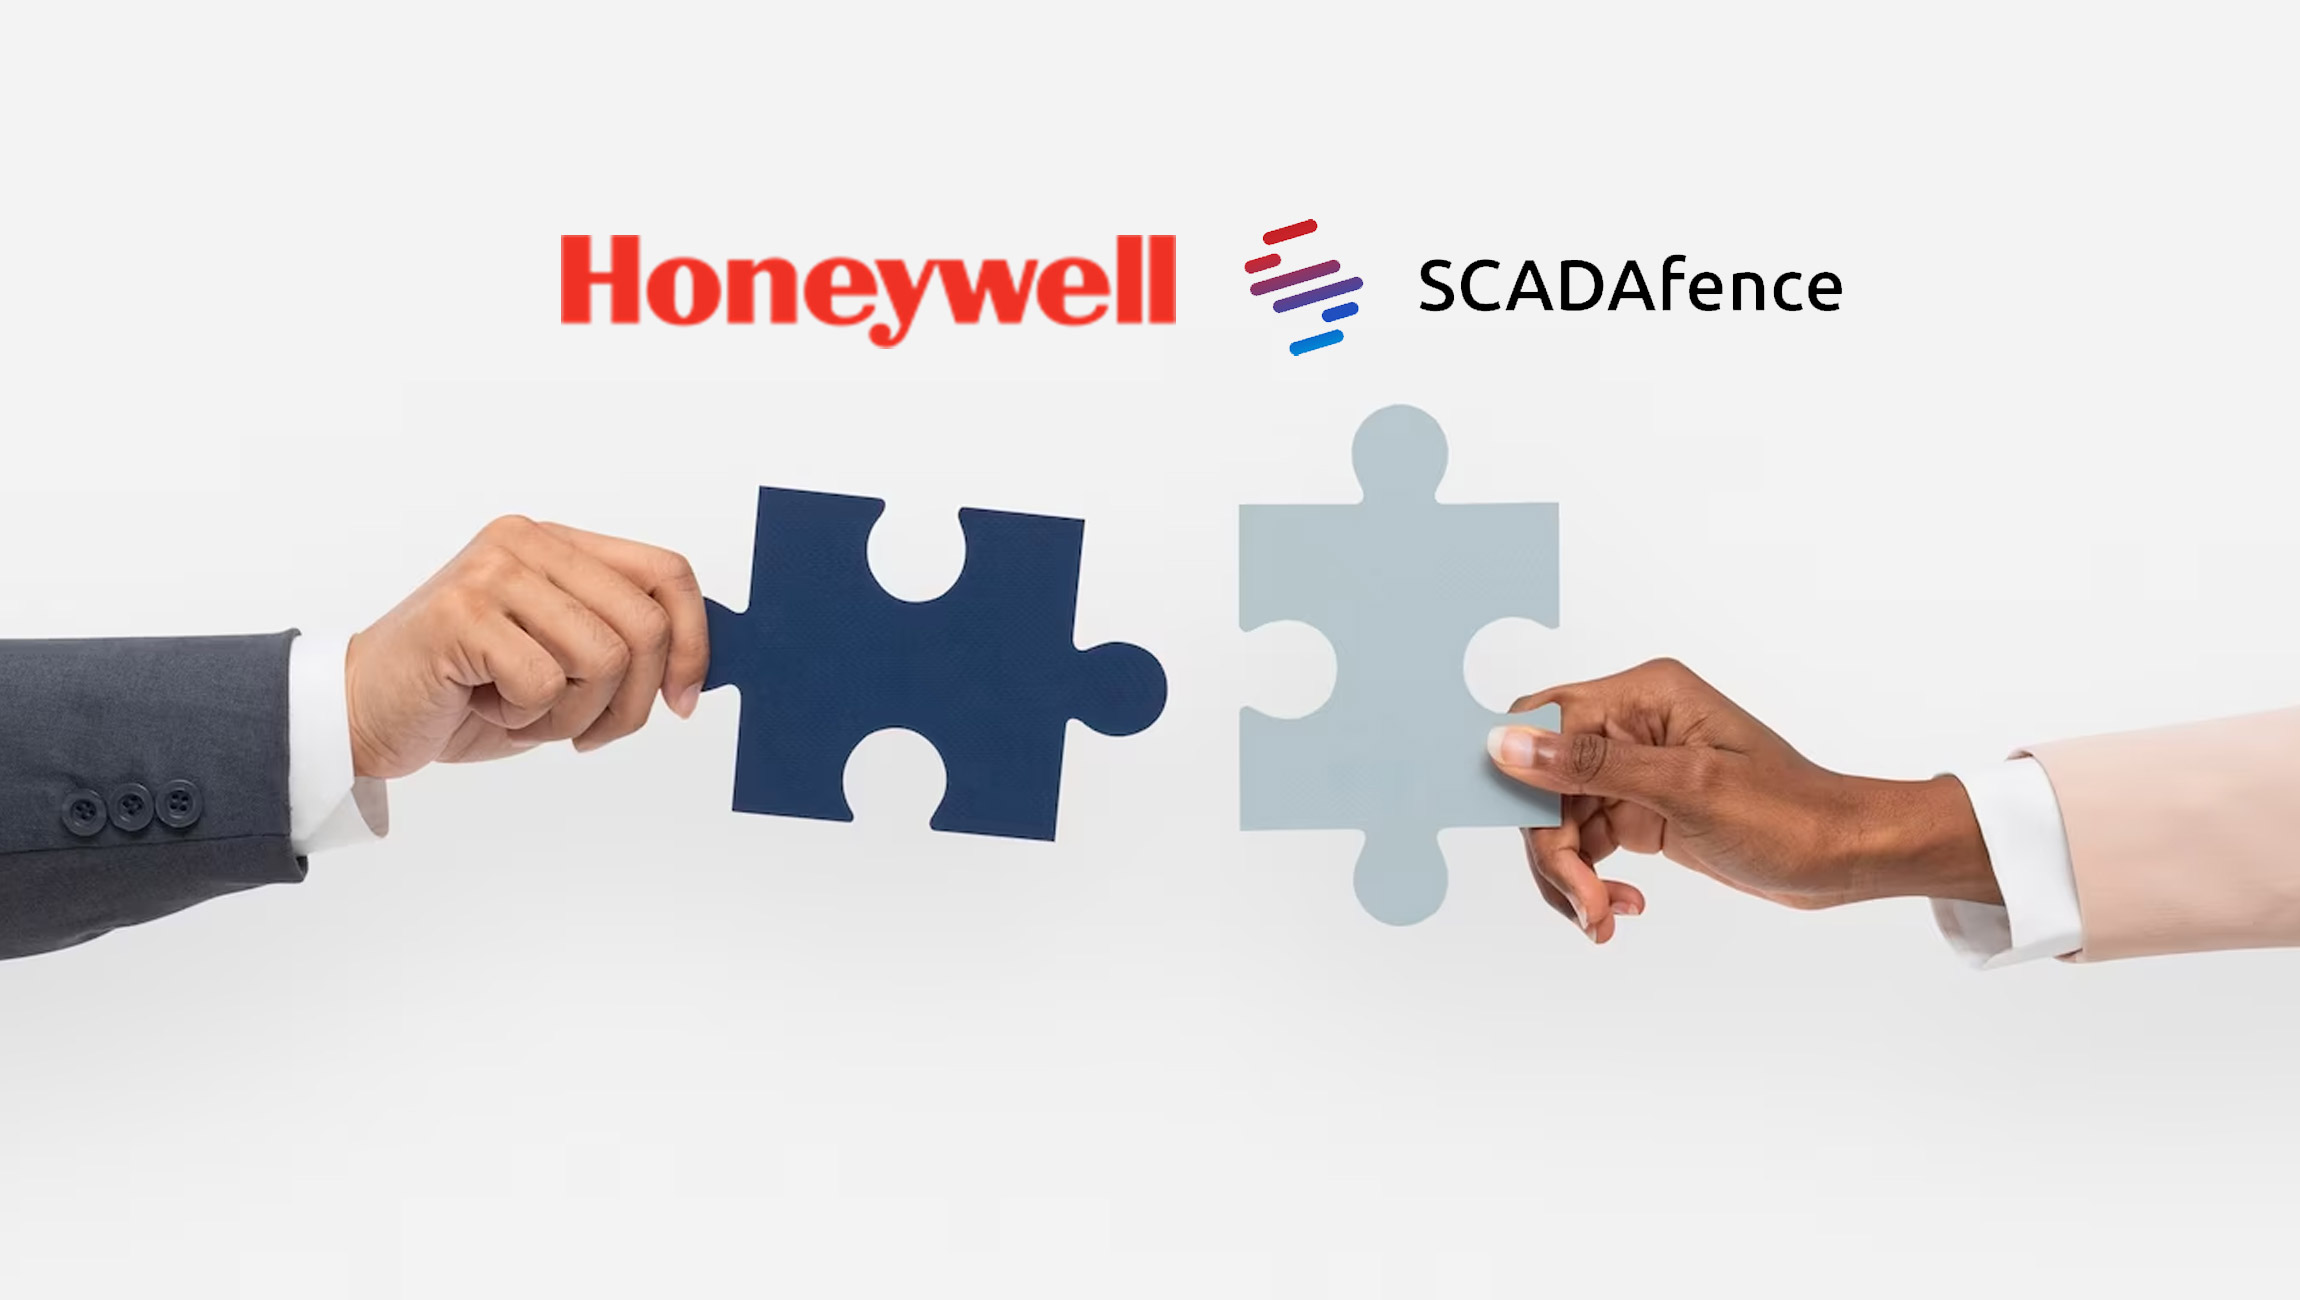 Honeywell To Acquire SCADAfence, Strengthening Its Cybersecurity Software Portfolio